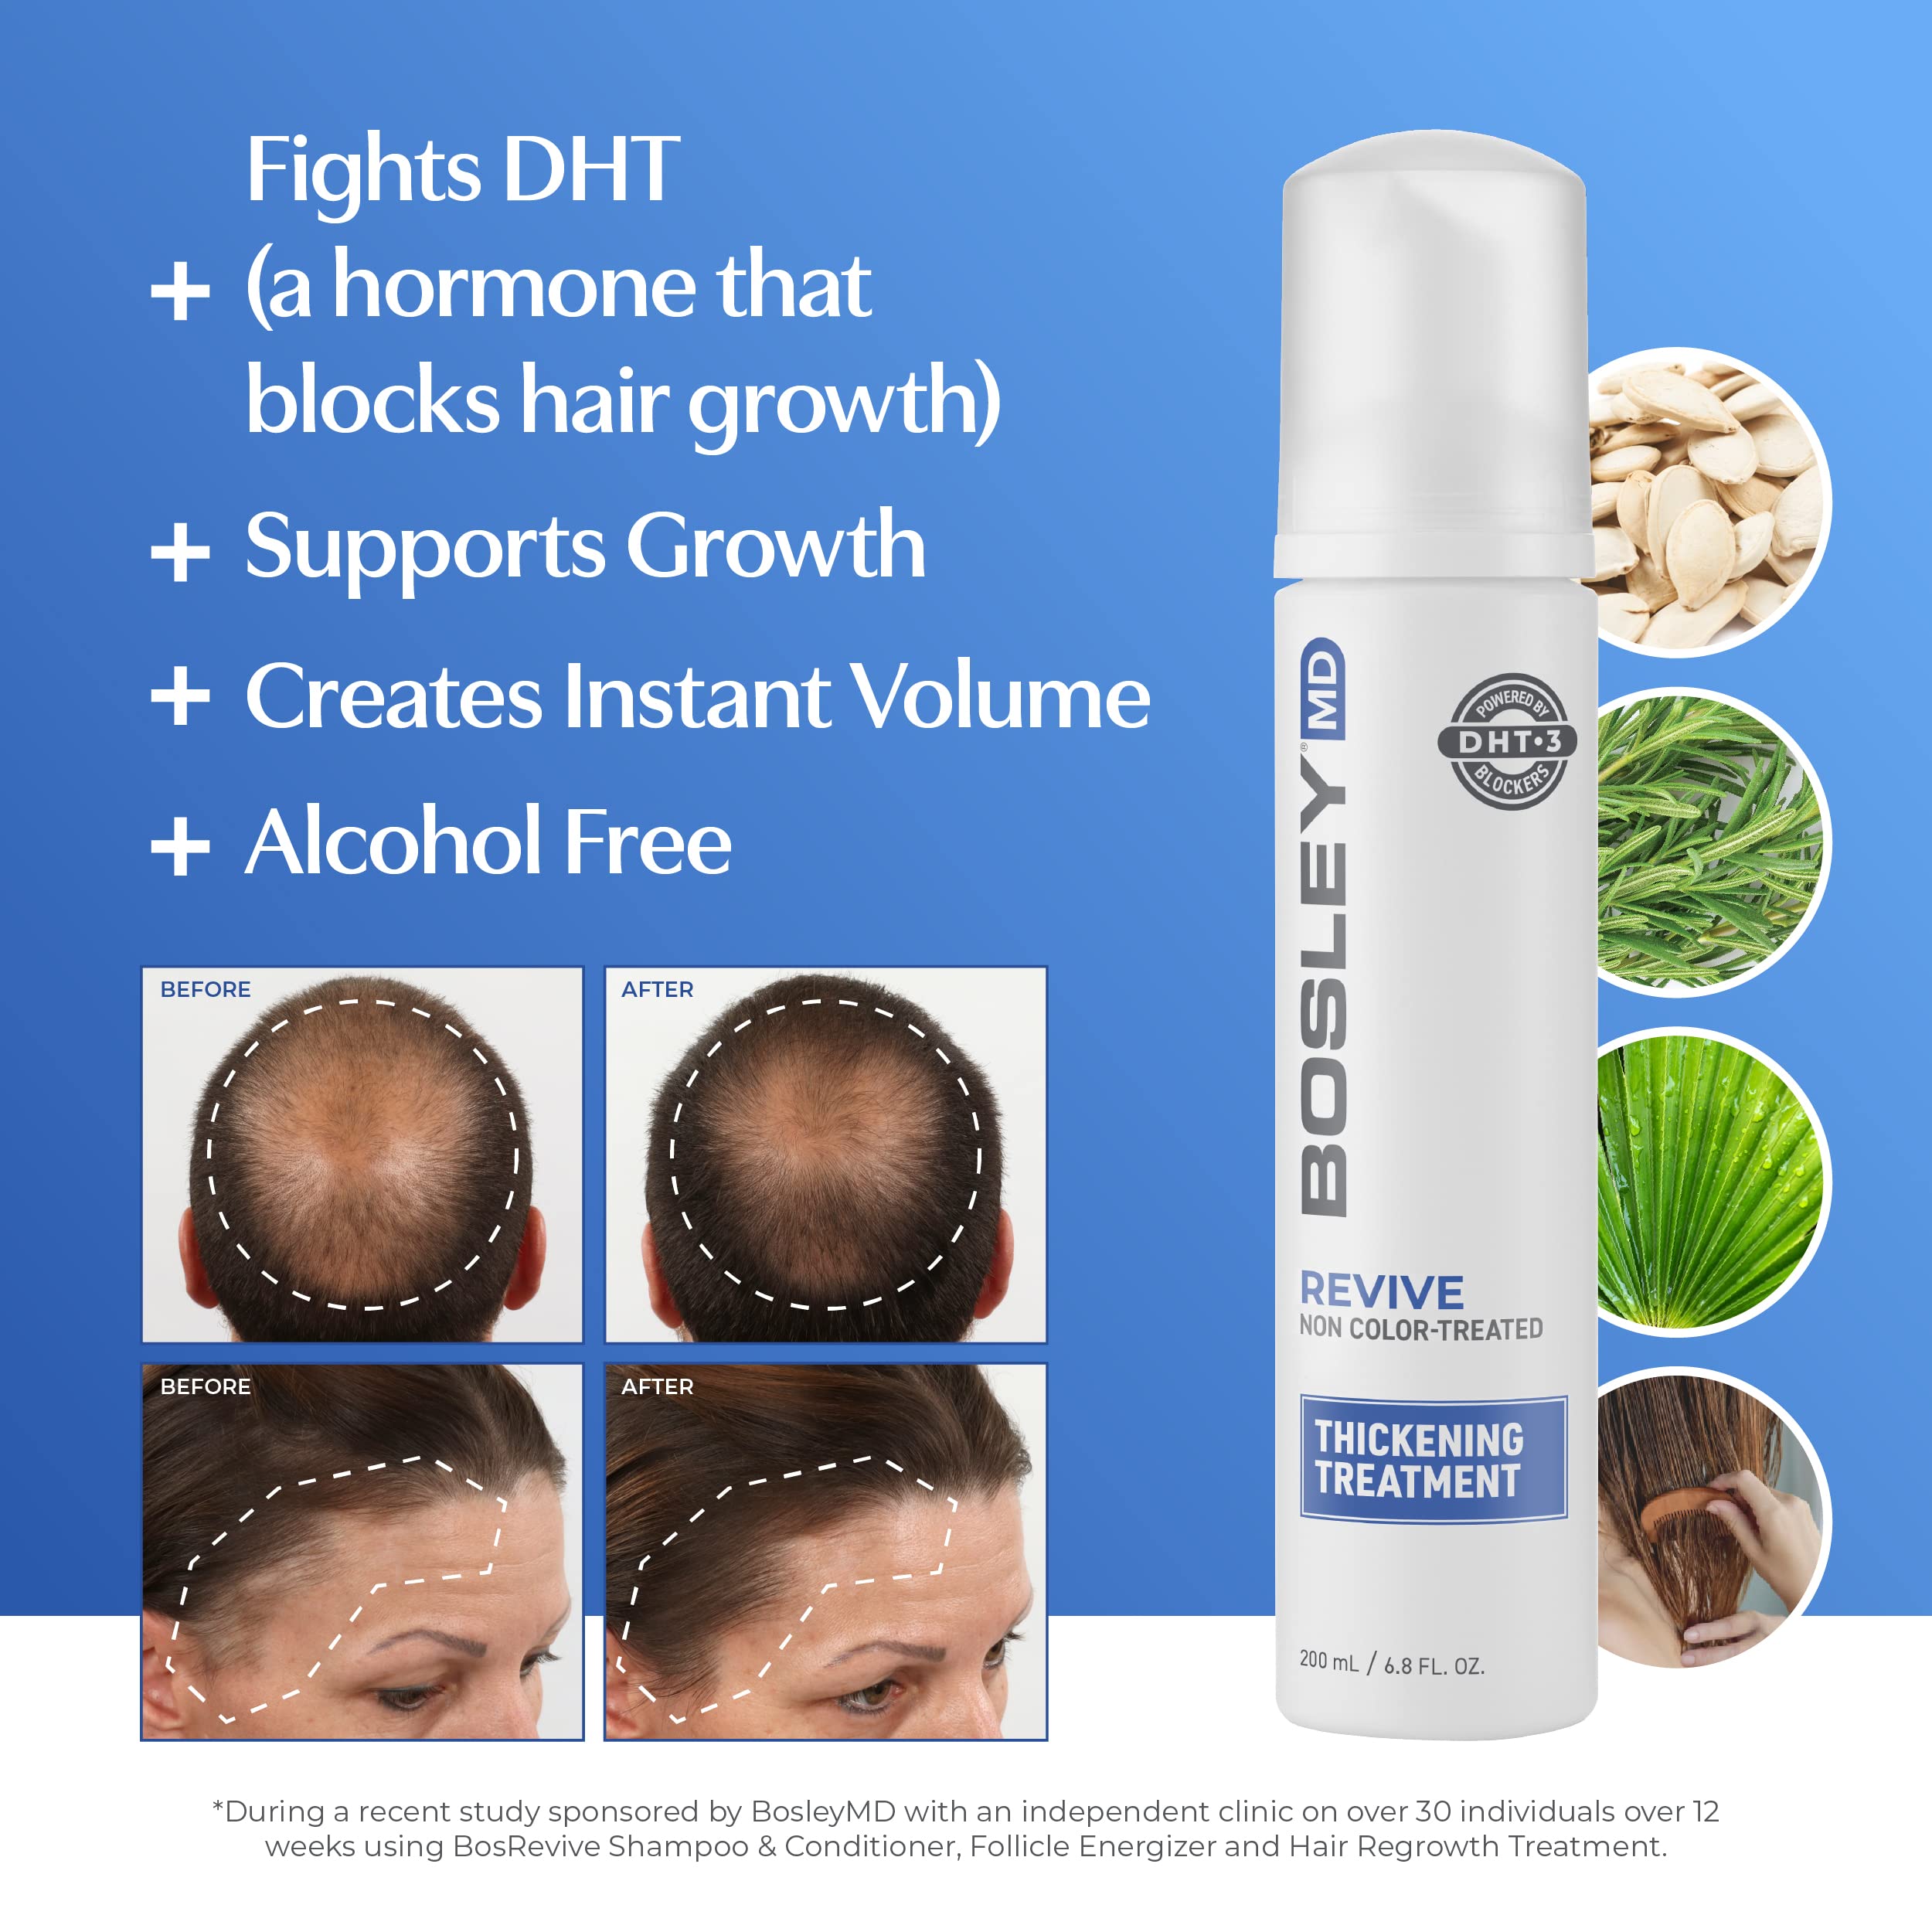 BosleyMD Thickening Treatment, Foaming Solution for Thinning Prevention, Hair Regrowth, Visible Hair Loss, Professional Hair Care Product, 6.8 oz. and 3.4 oz.